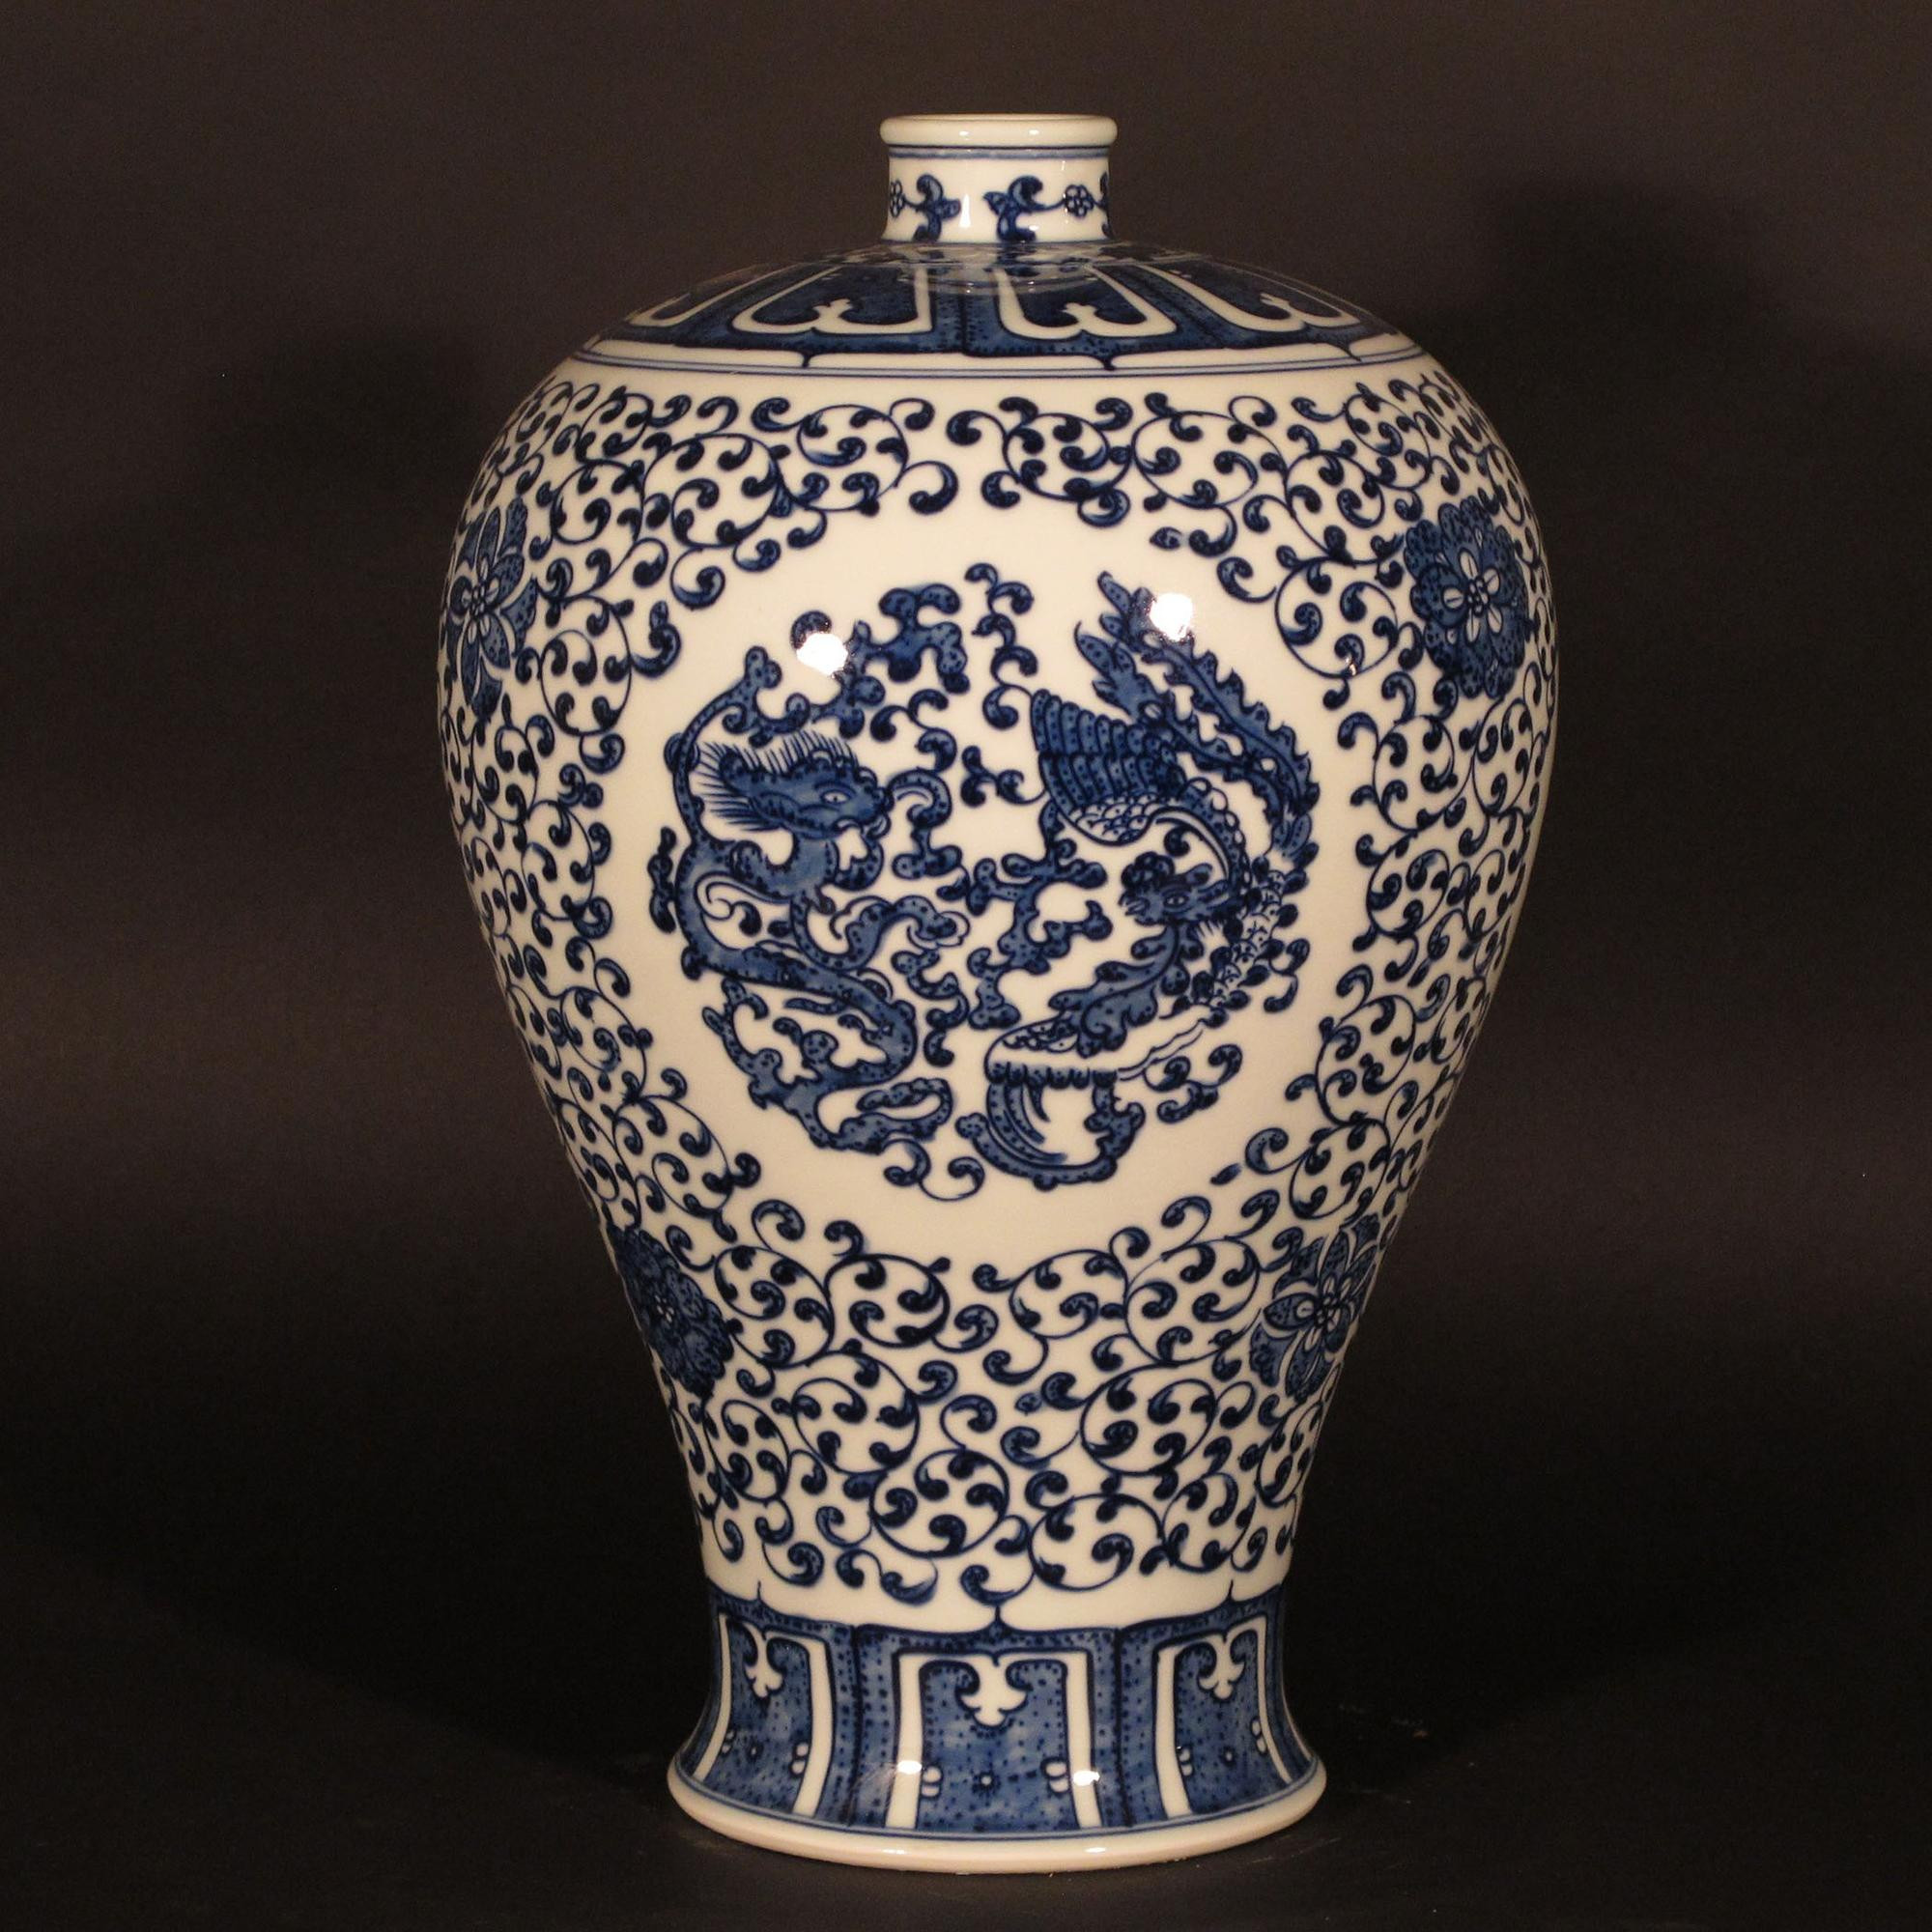 30 Wonderful Chinese Vases for Sale Uk 2024 free download chinese vases for sale uk of porcelain meiping vase blue white with peony design in porcelain meiping vase blue white with peony design 21 x 21 x 30